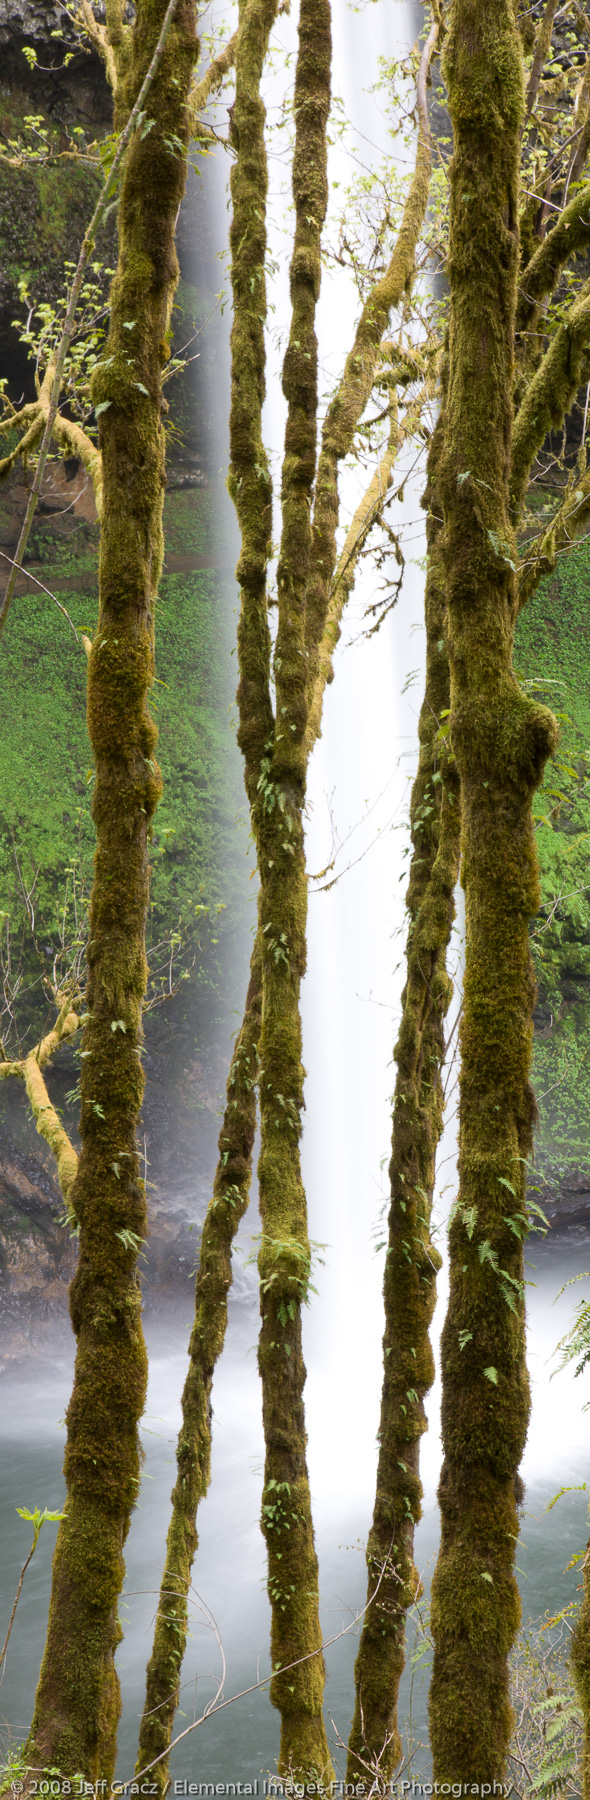 Tree trunks and waterfalls |  | OR | USA - © © 2008 Jeff Gracz / Elemental Images Fine Art Photography - All Rights Reserved Worldwide